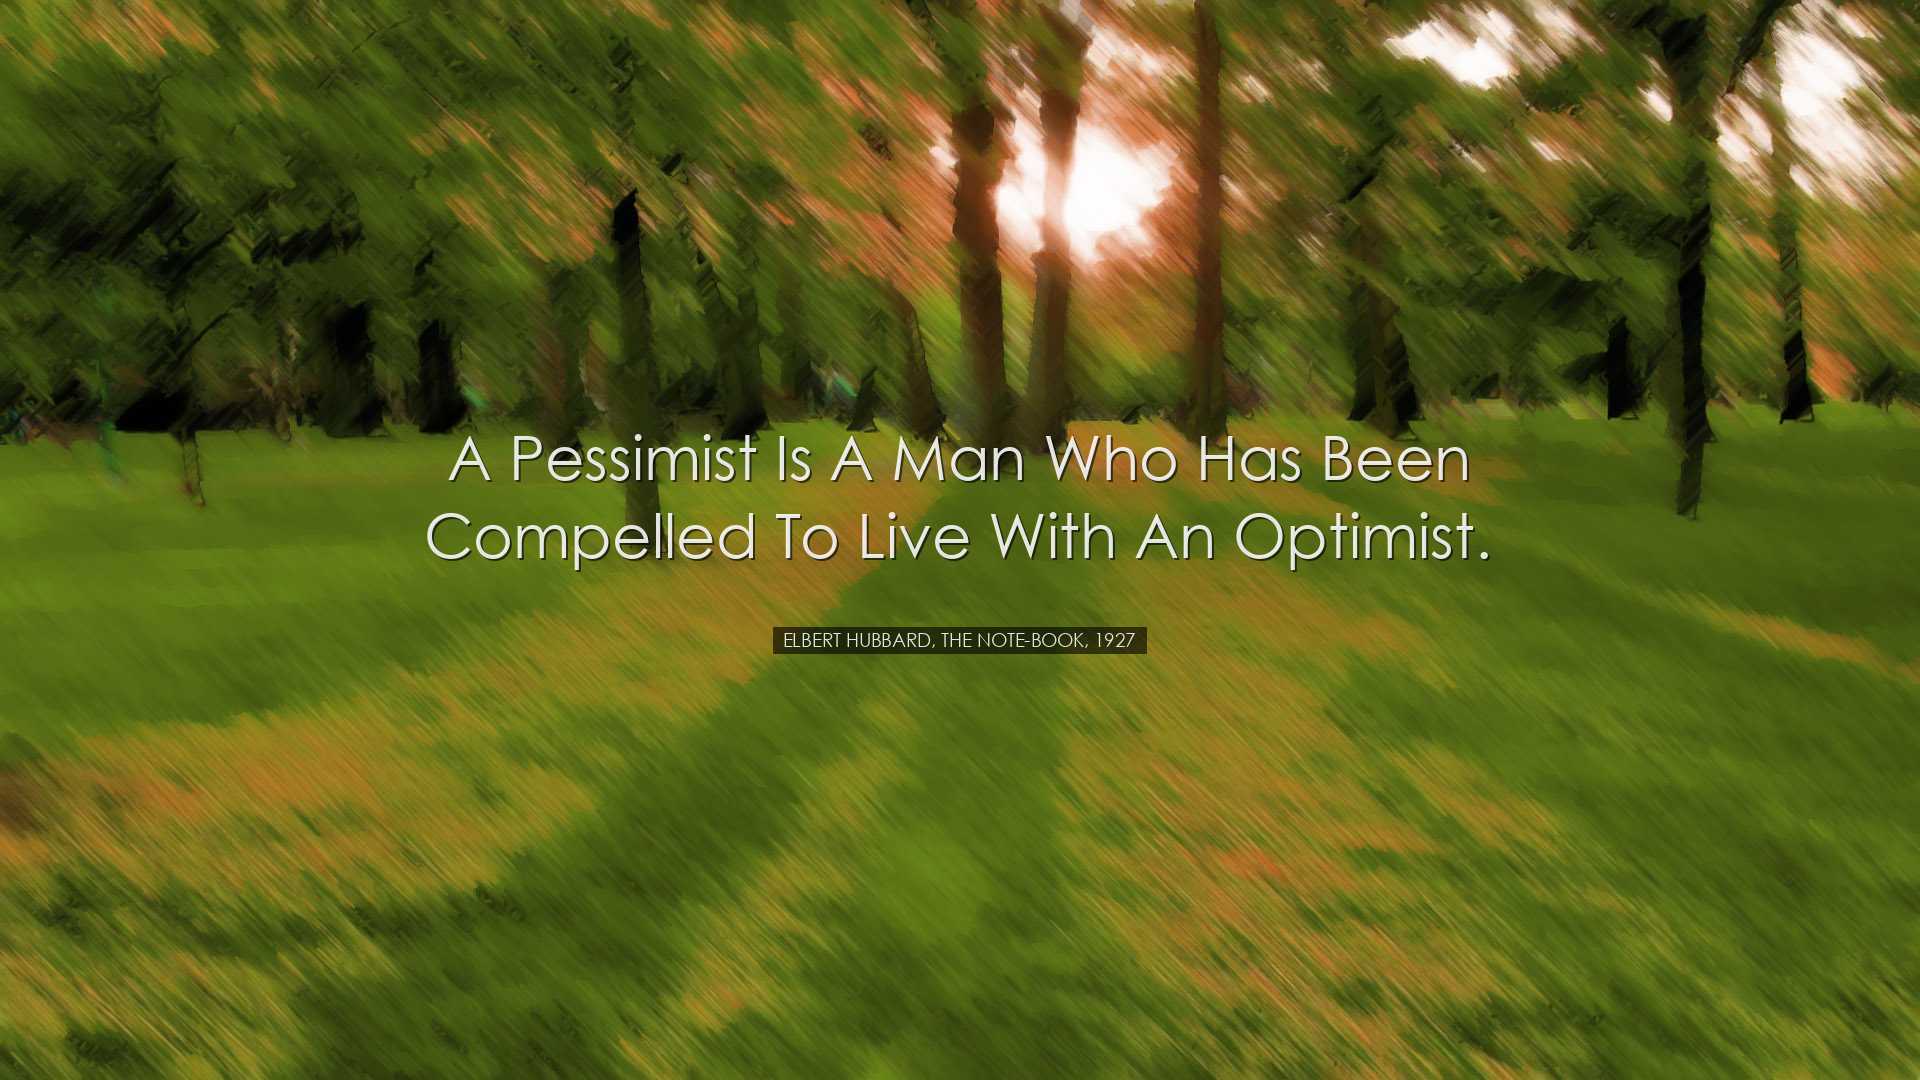 A pessimist is a man who has been compelled to live with an optimi